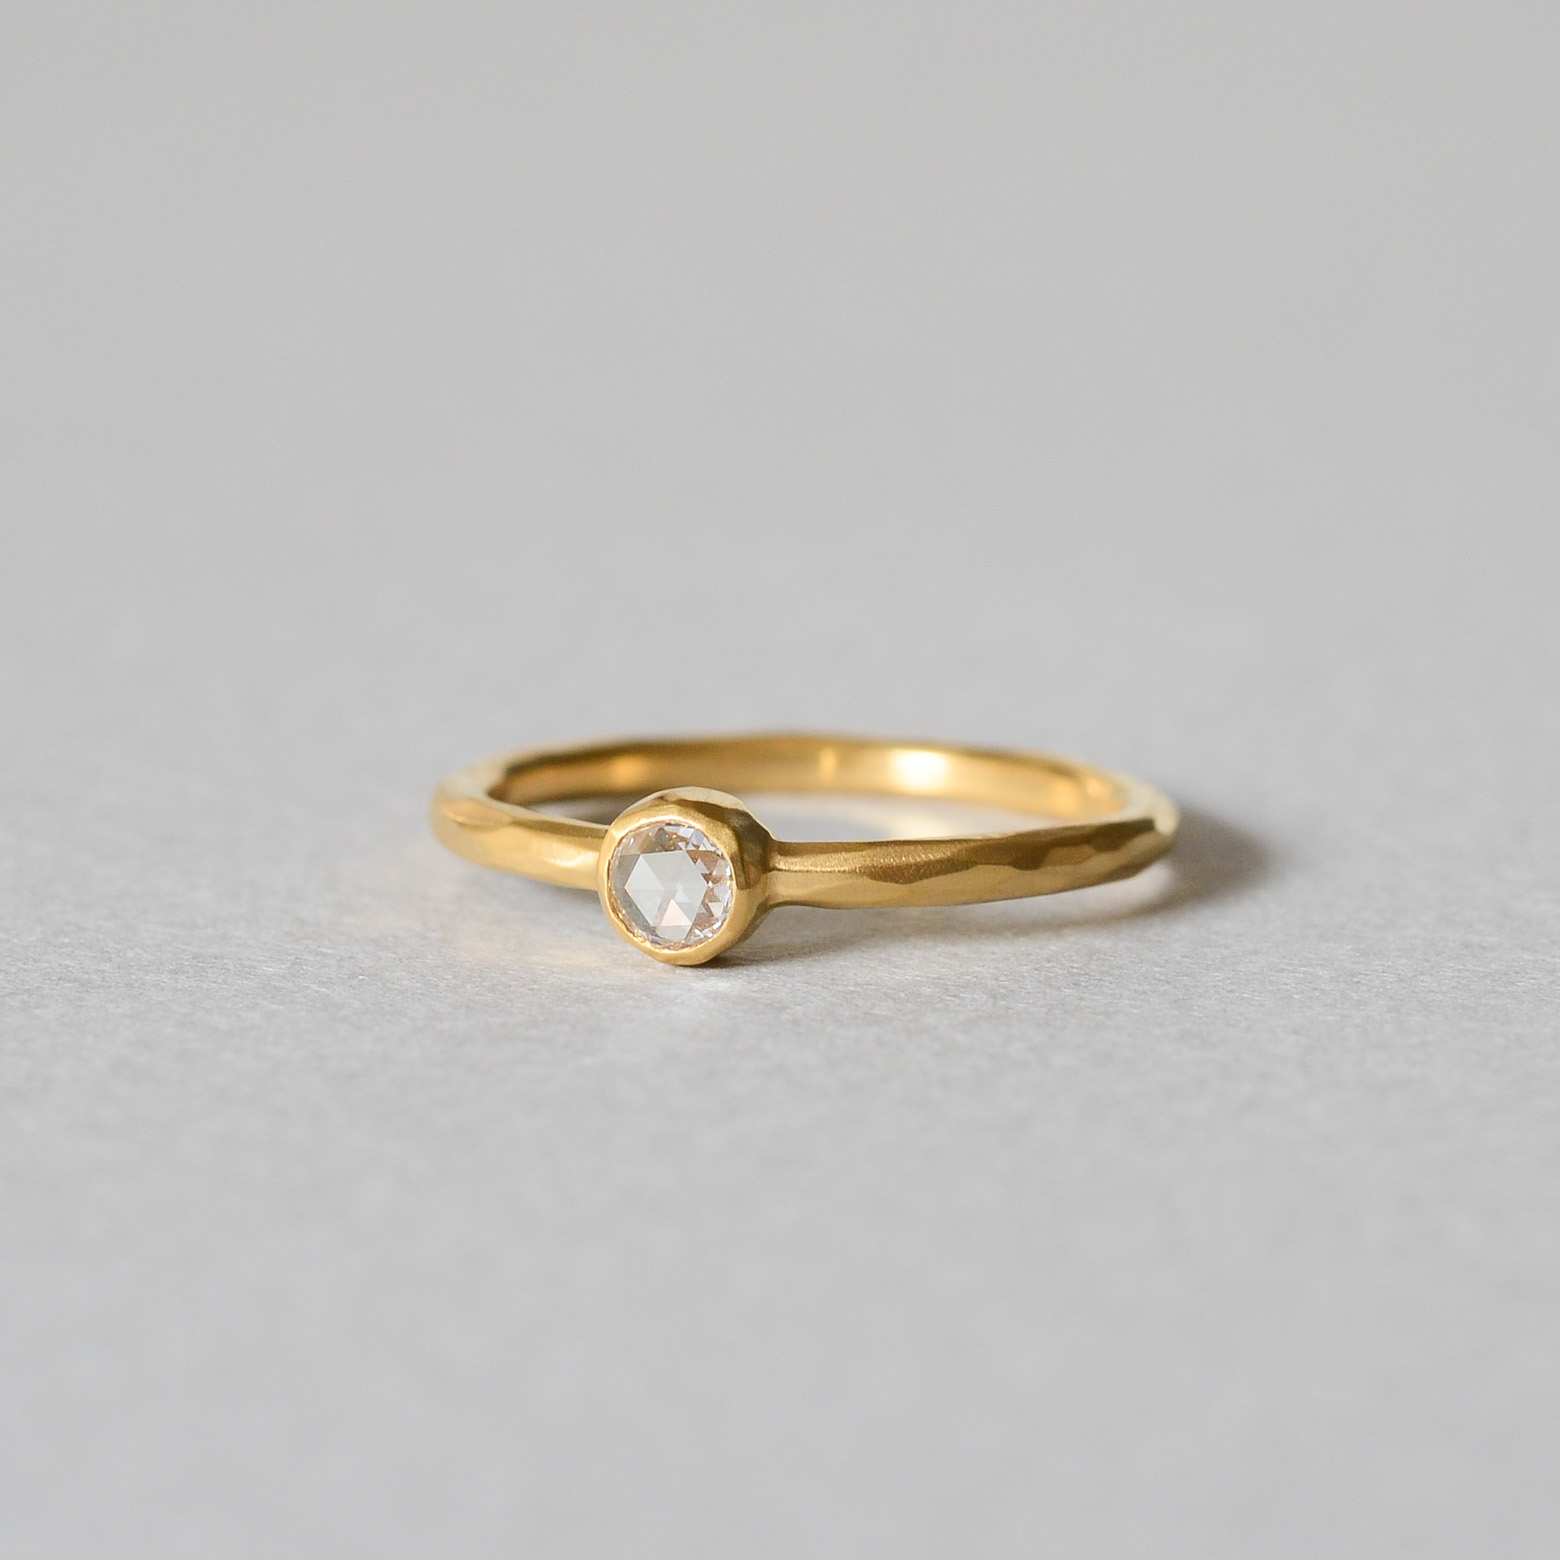 3mm Rosecut Diamond Ring (SOURCE) - SOURCE objects